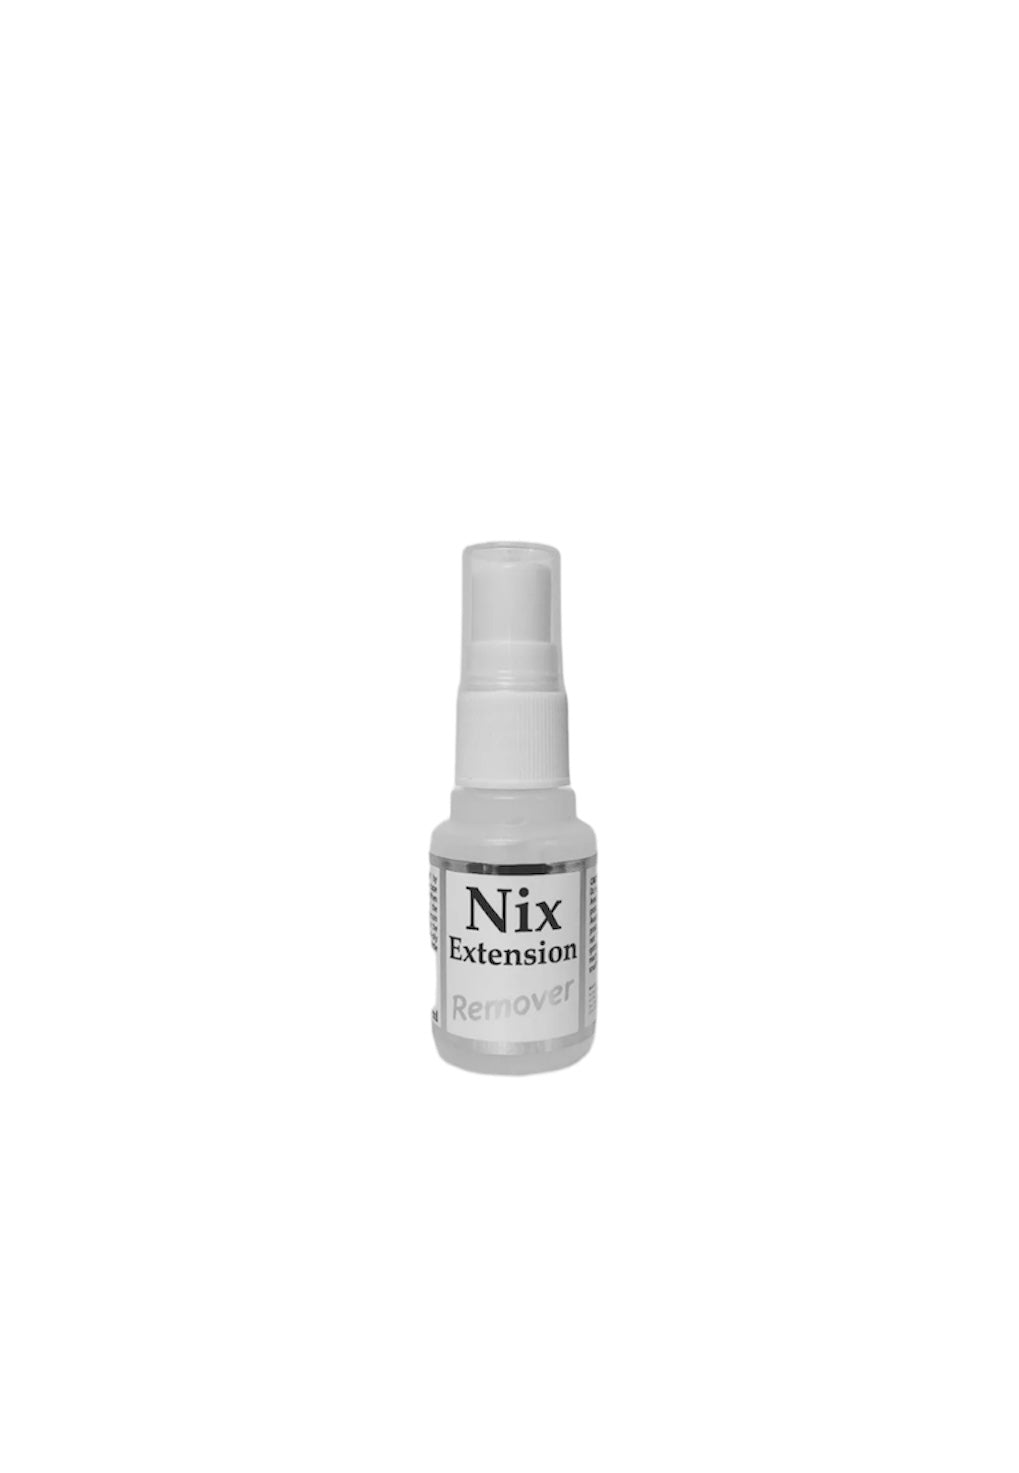 NIX ICE EXTENSION Remover